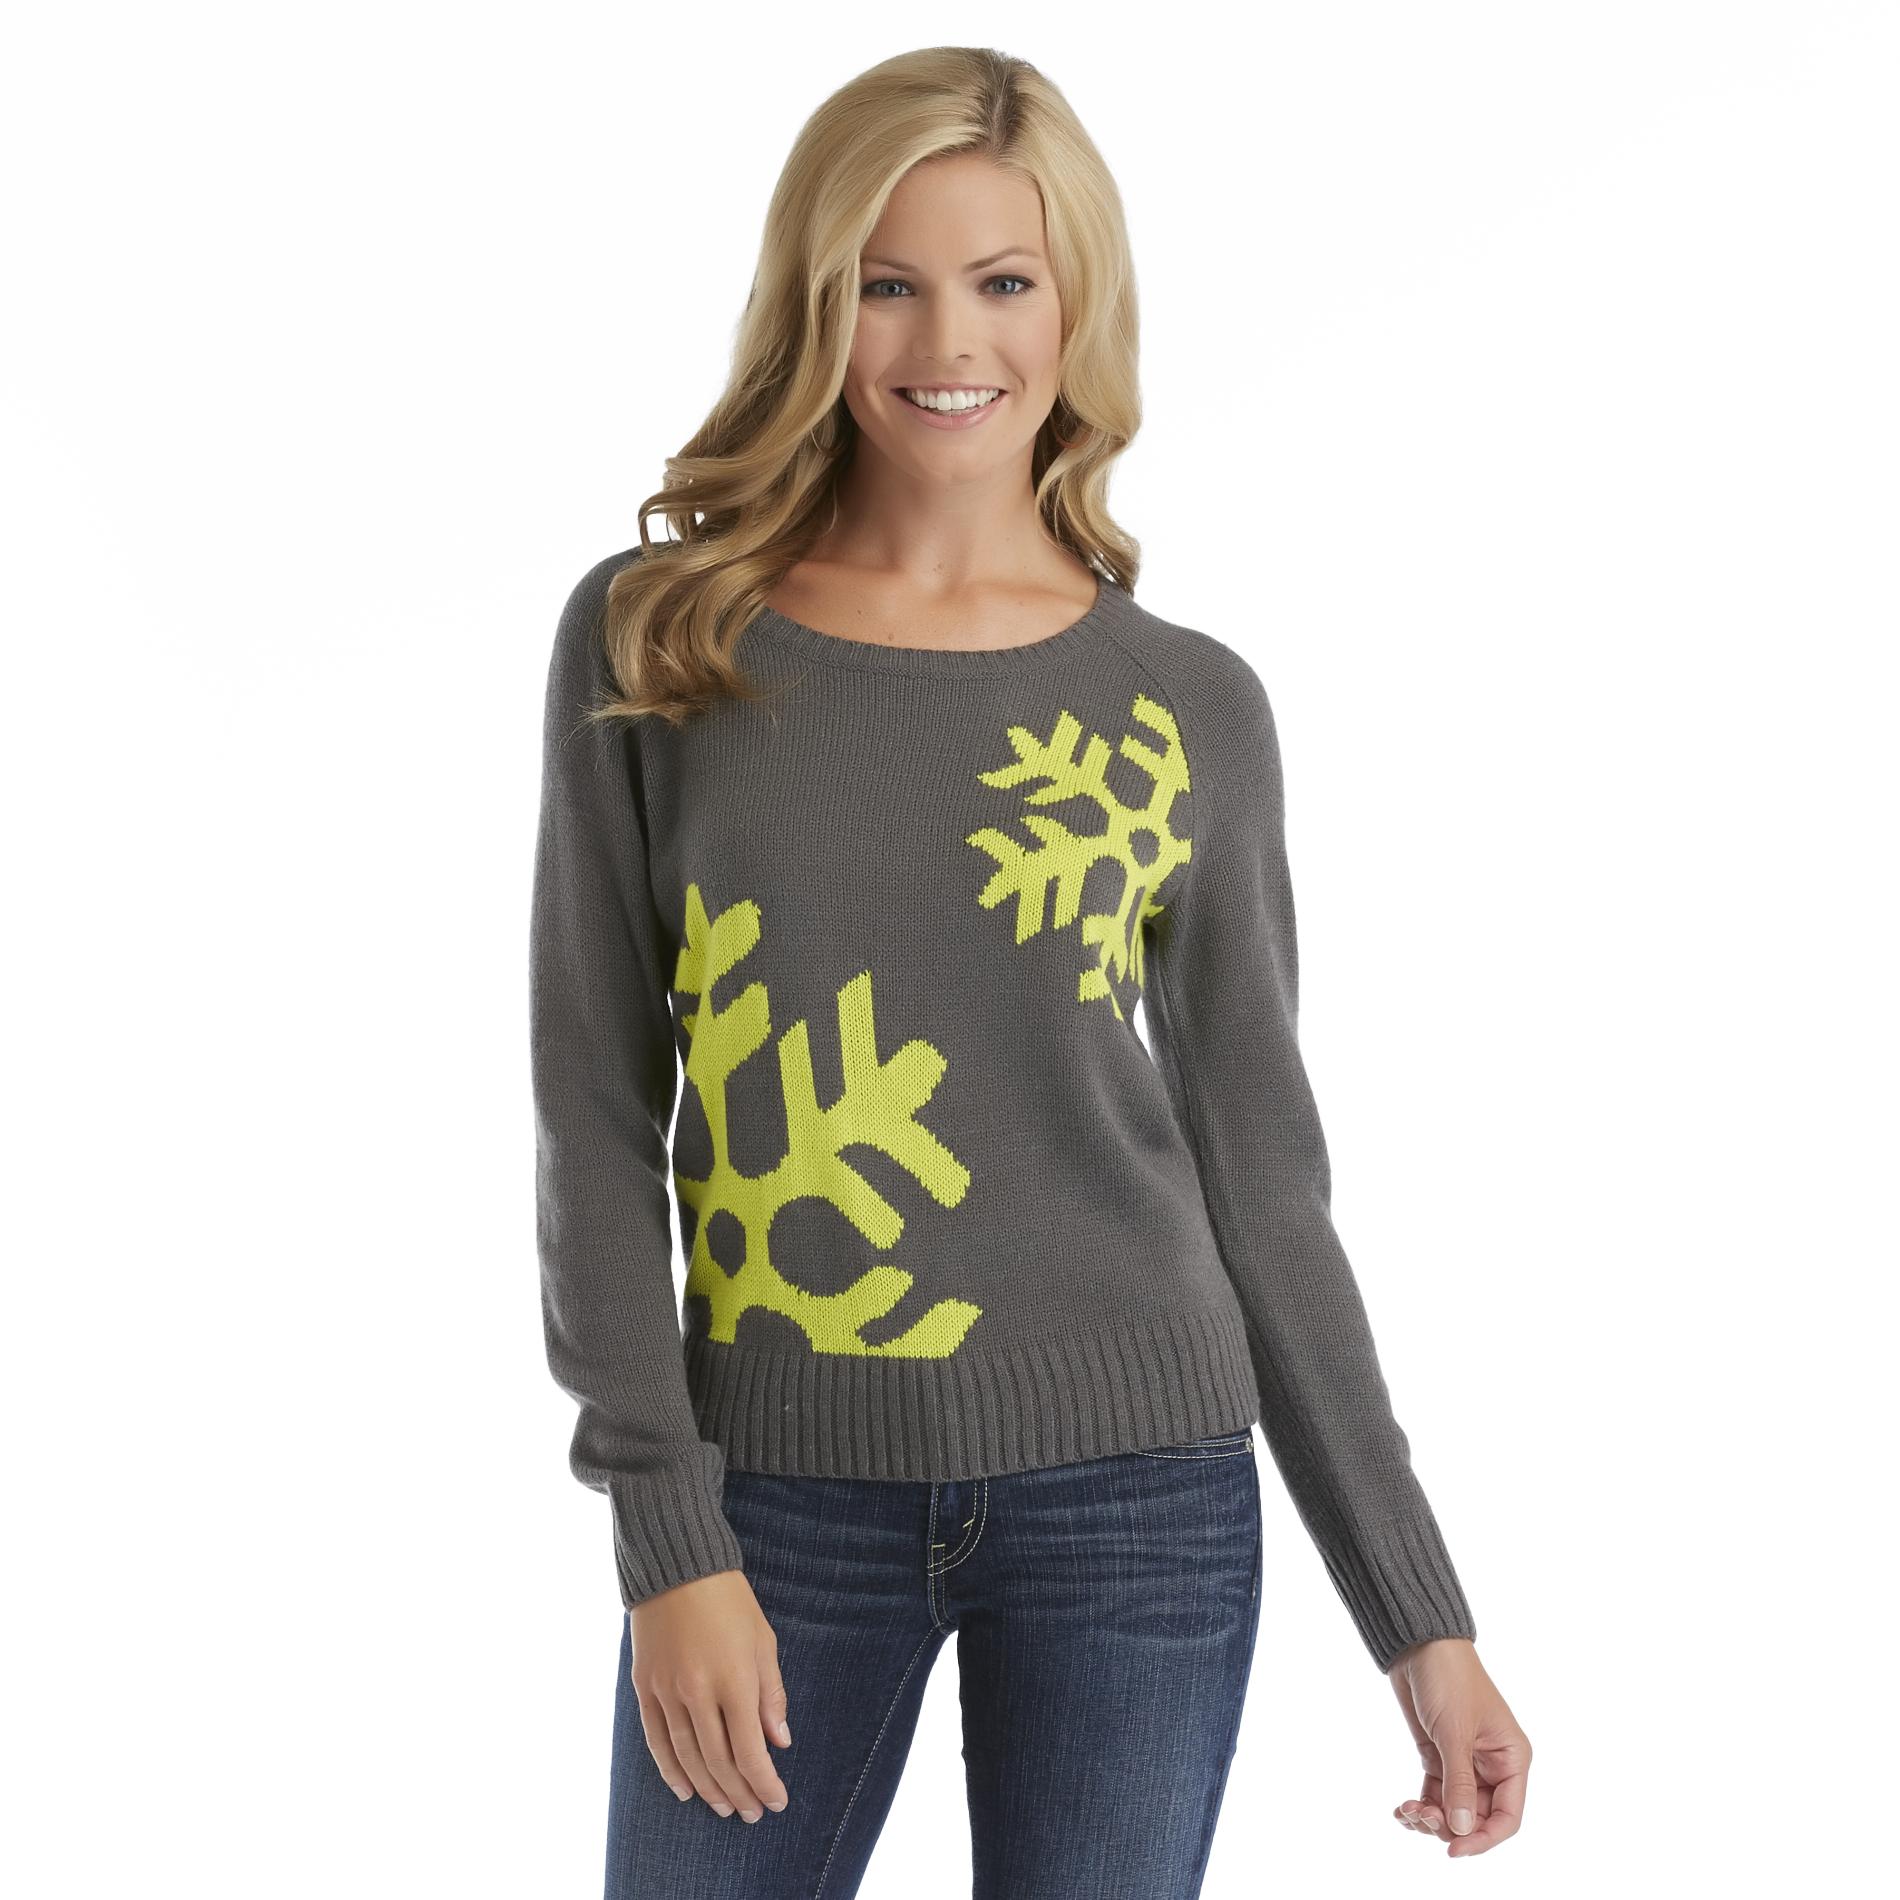 Route 66 Women's Knit Sweater - Snowflakes